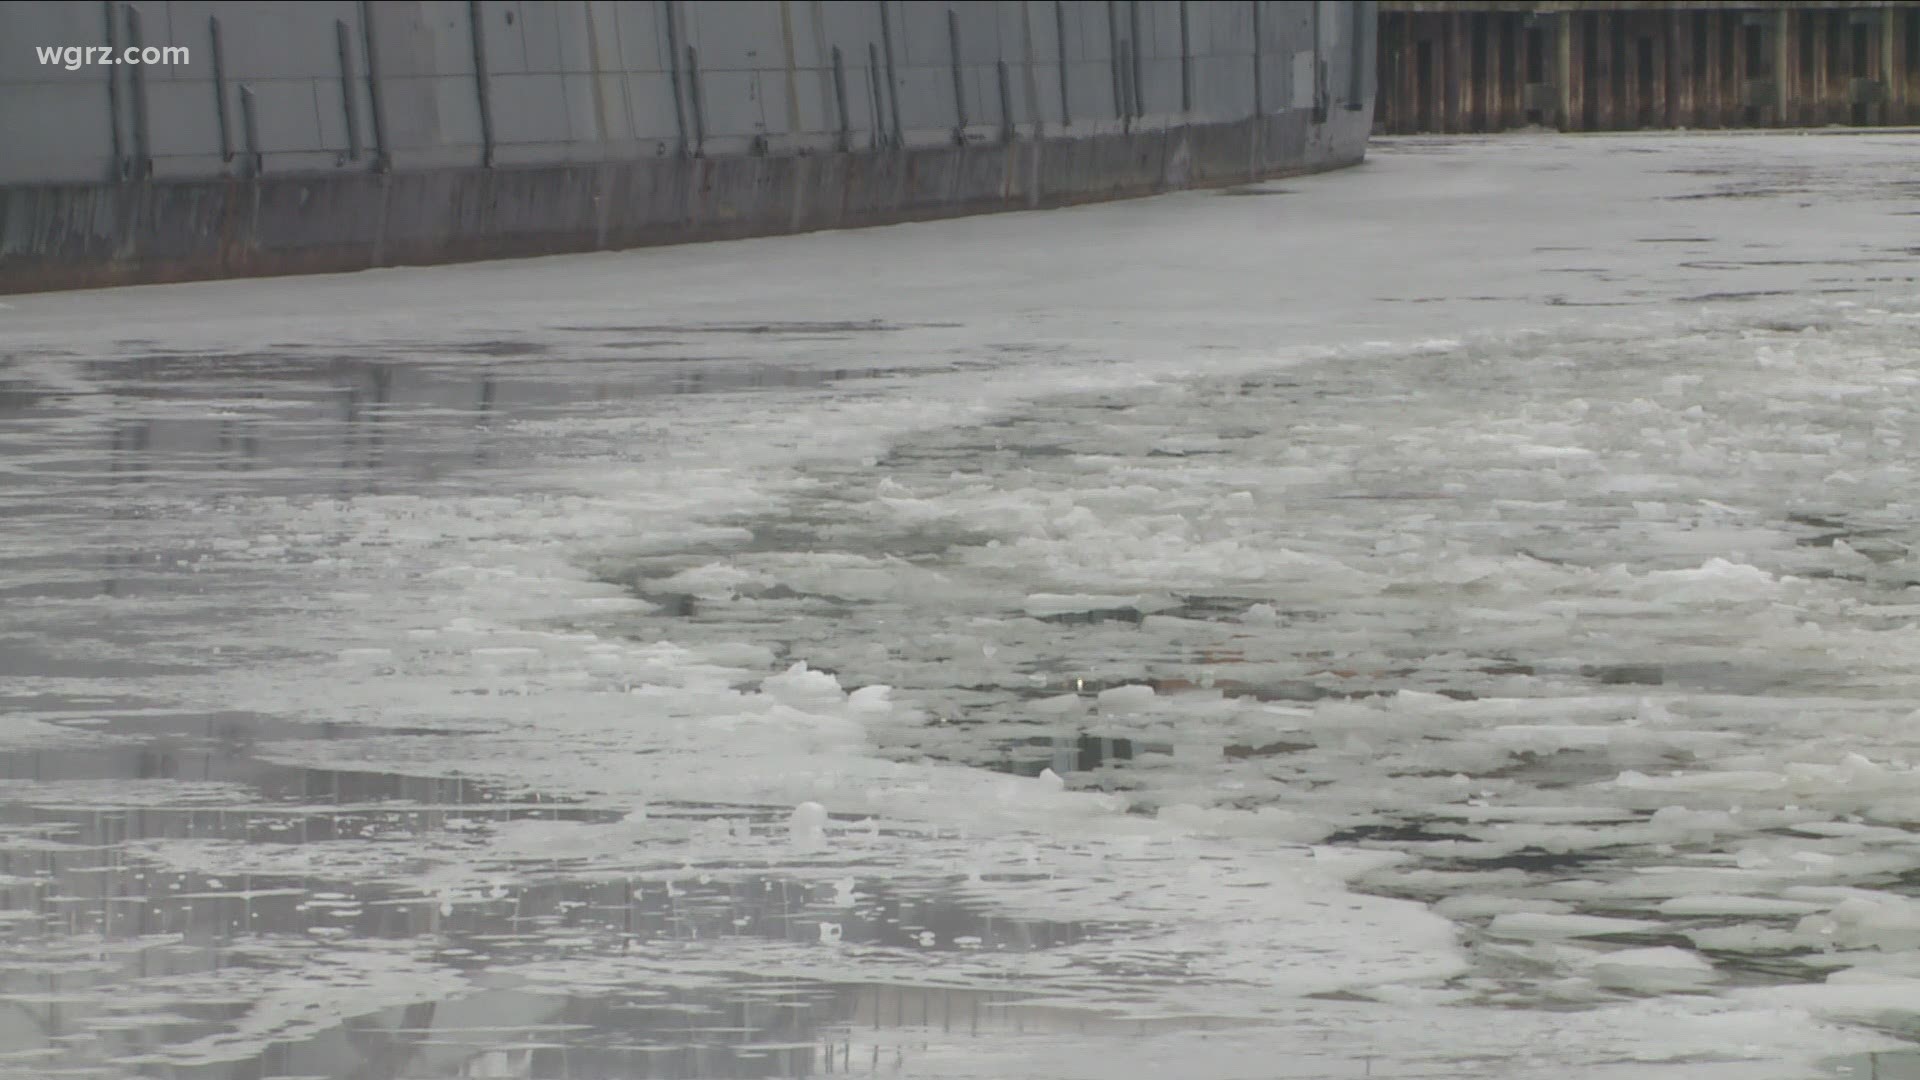 Coast Guard warns of dangers of thin ice with warmer temps ahead 